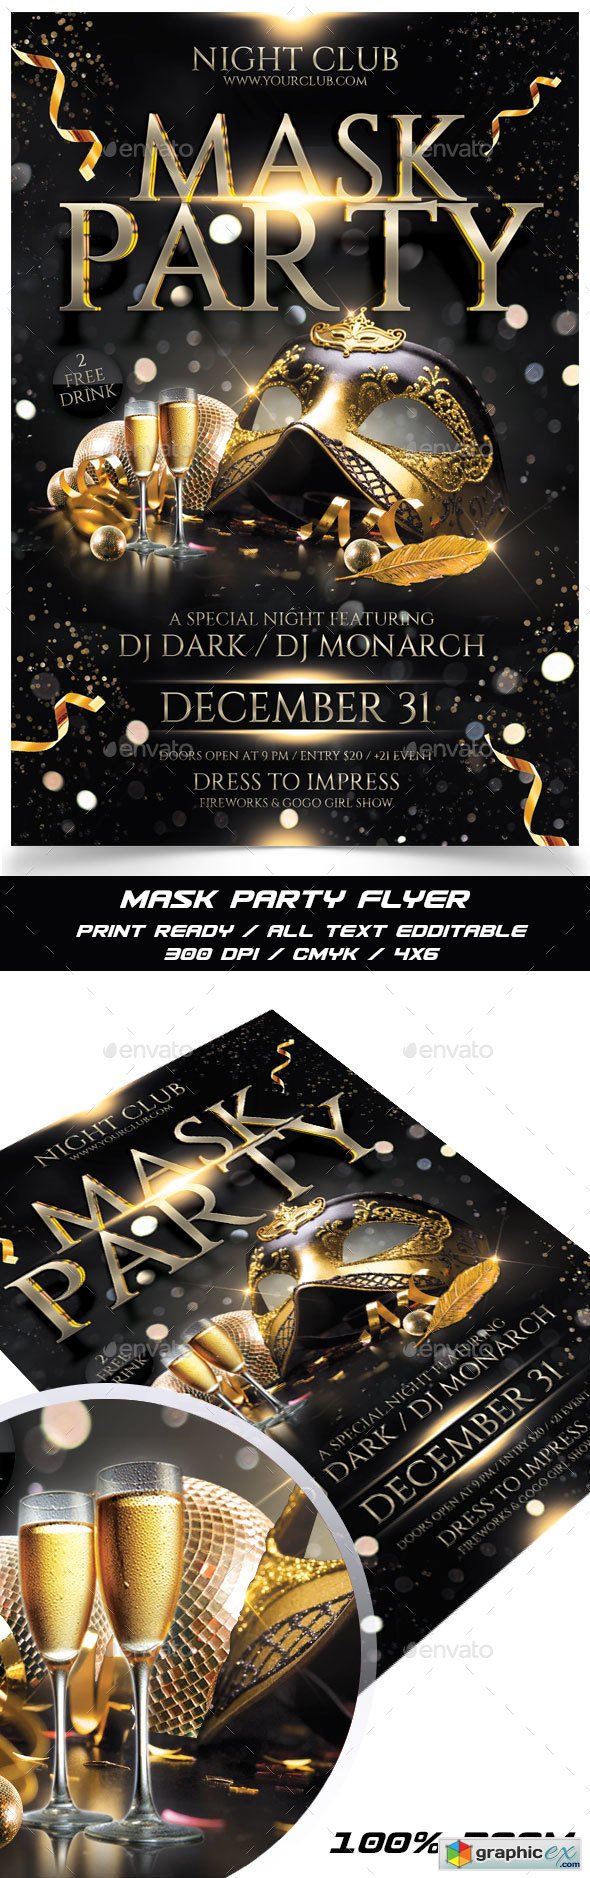 Mask Party Flyer